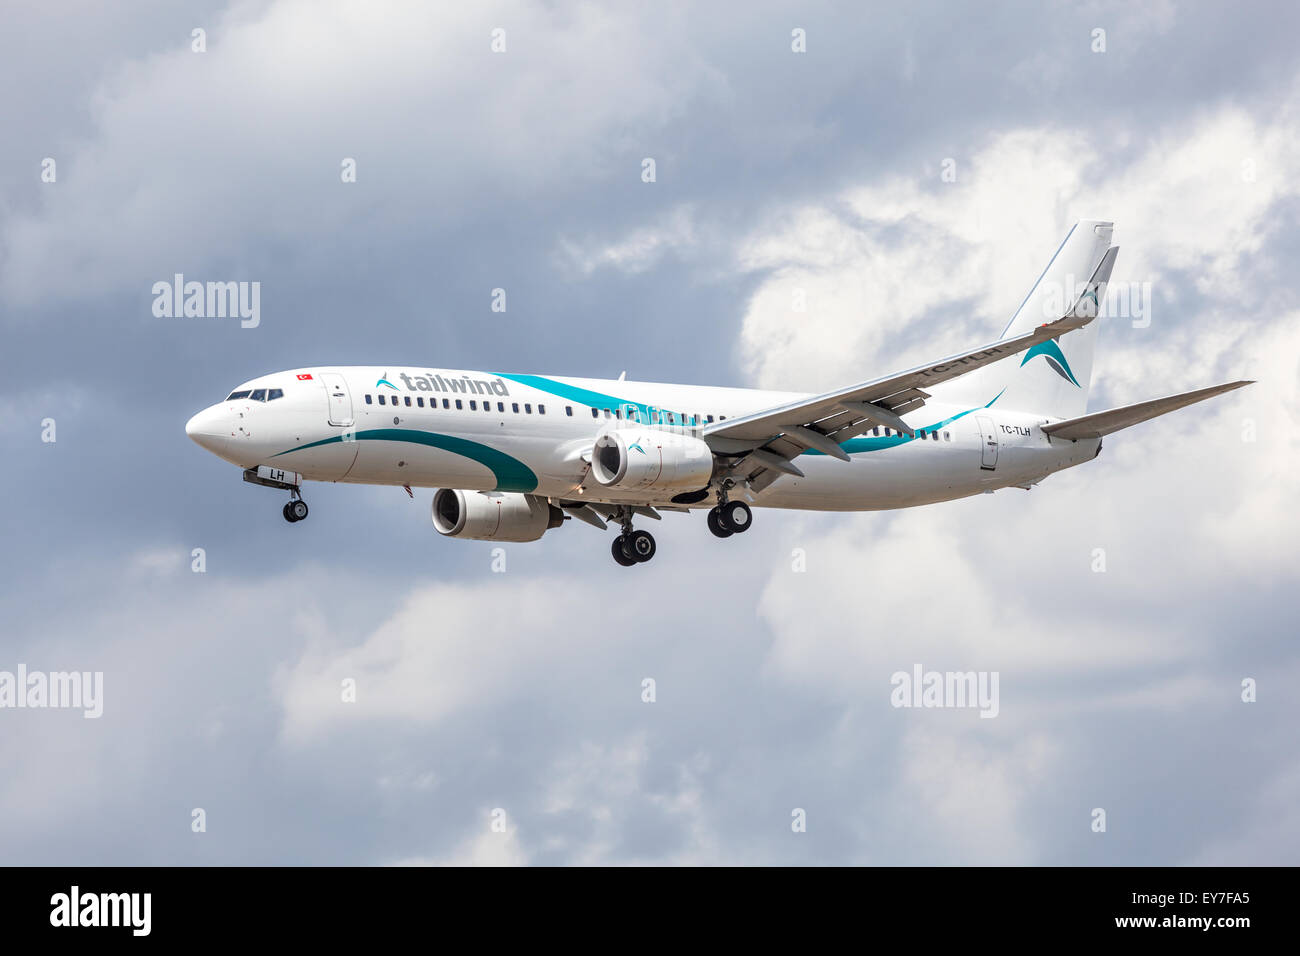 Boeing 737 Next Gen of the Tailwind Airlines landing at the Frankfurt International Airport Stock Photo